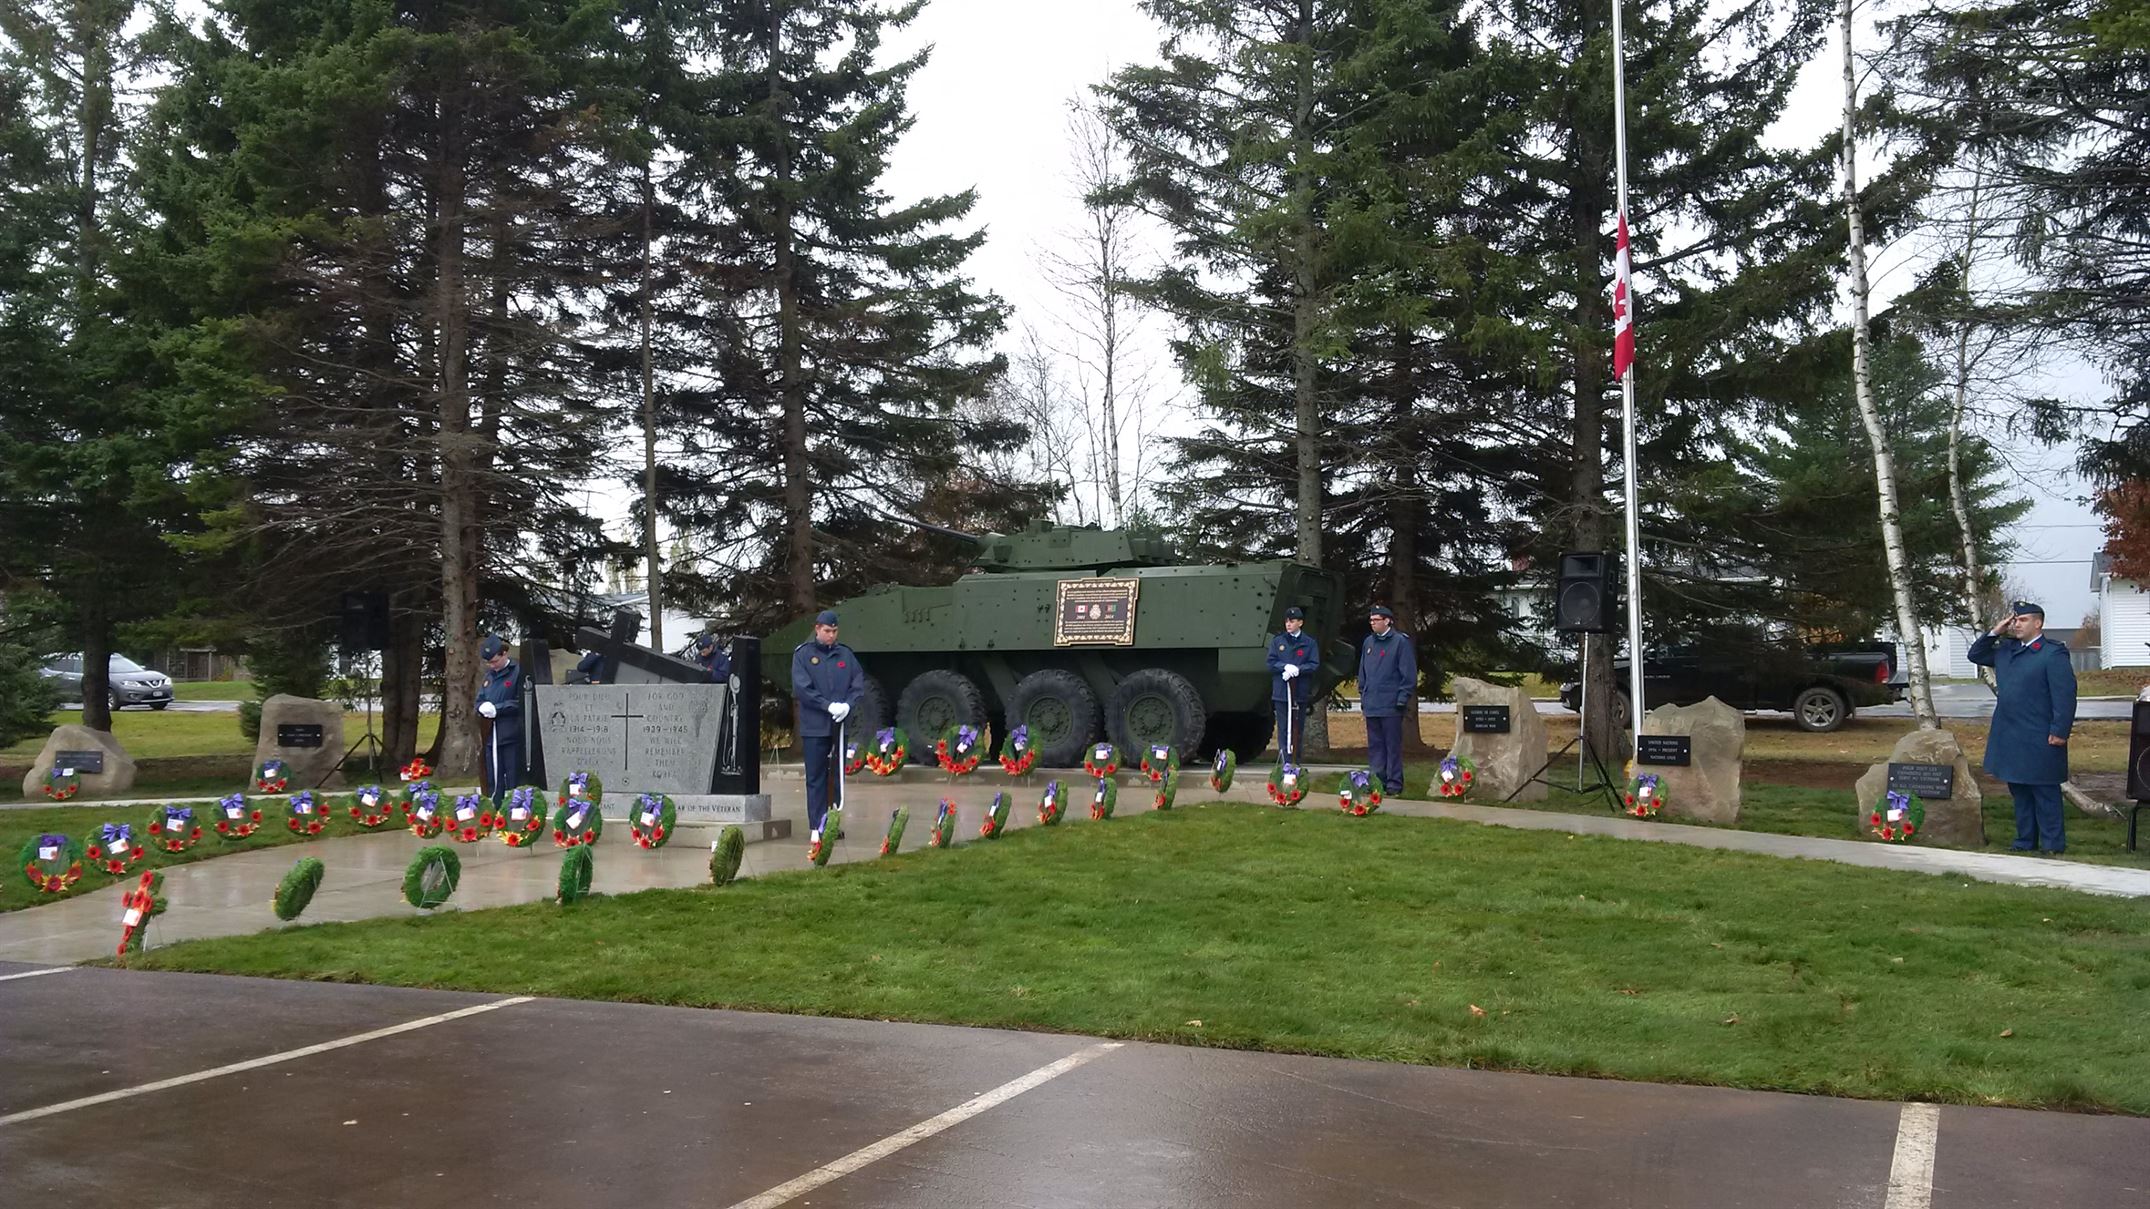 Official unveiling ceremony, Remembrance Day 2016